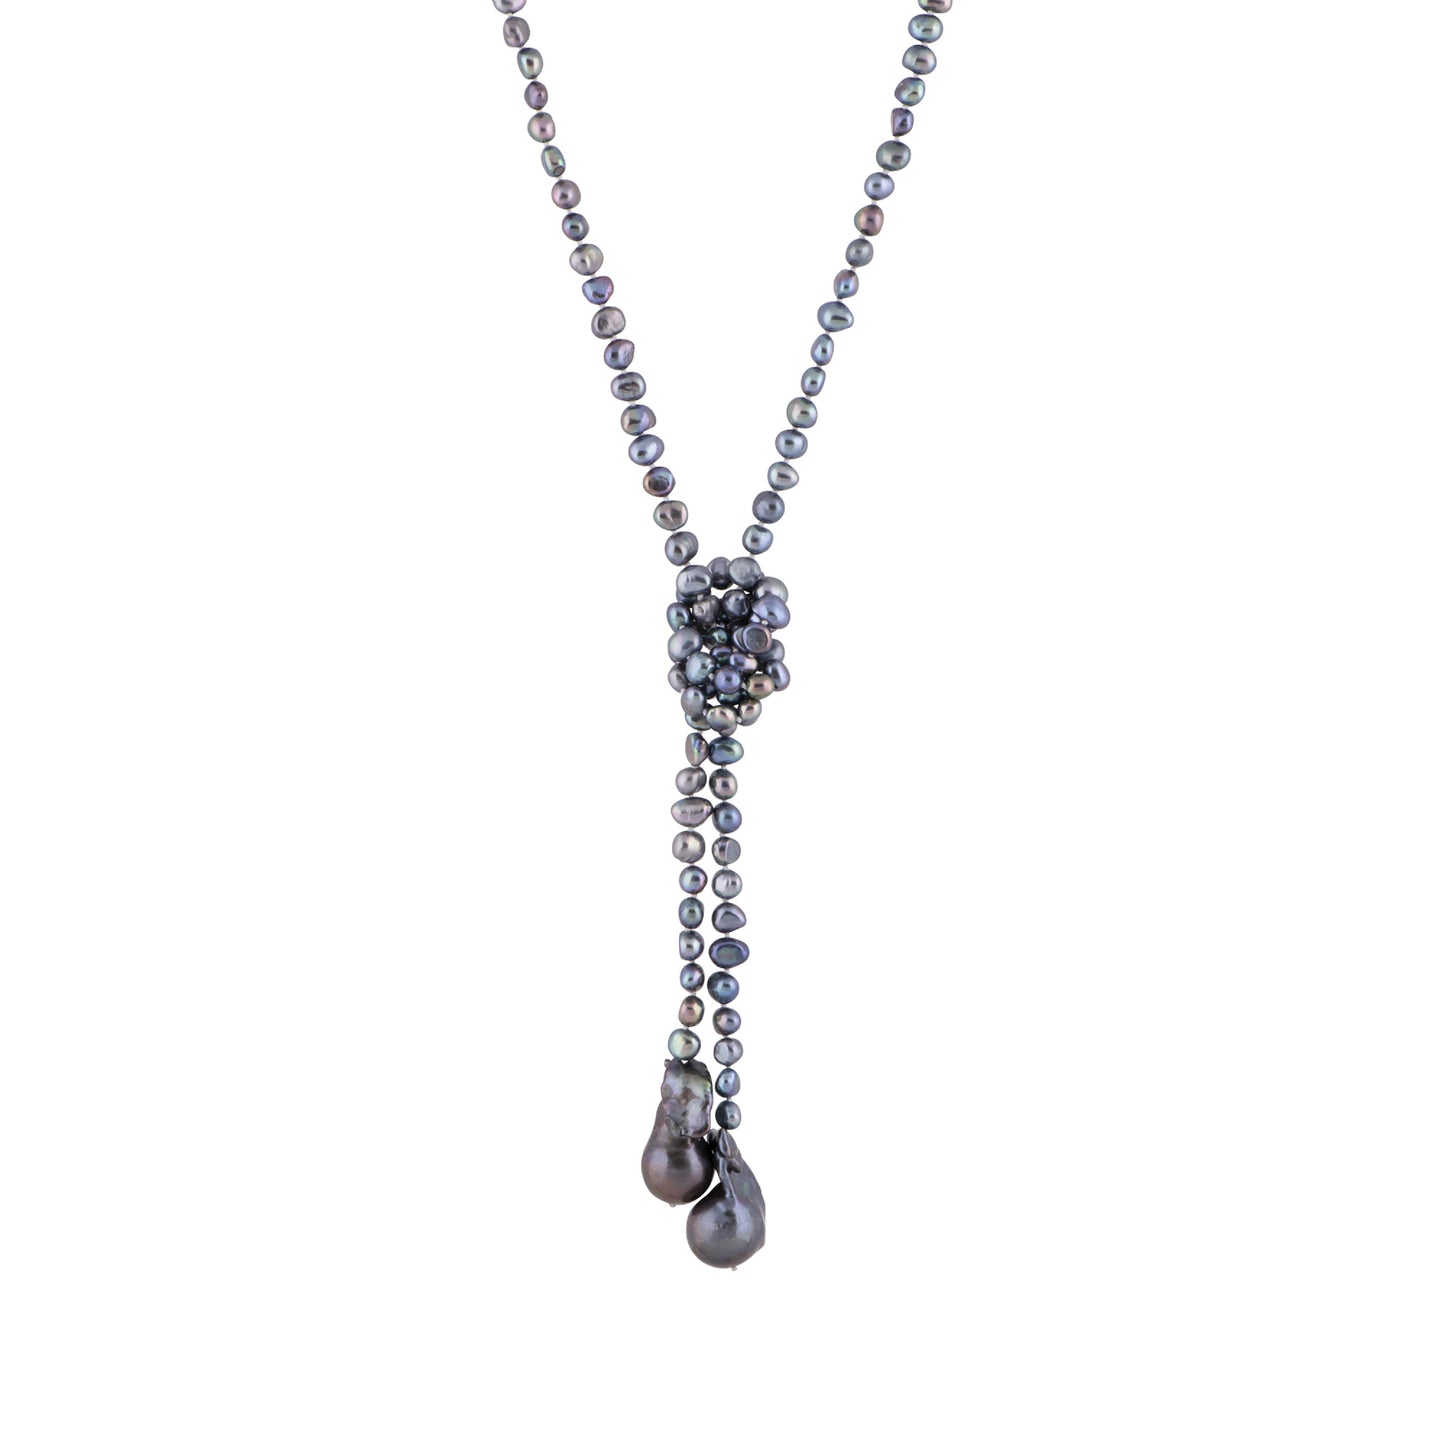 Denise - Baroque and Freshwater pearl lariat necklace (Dark grey pearls, tied)